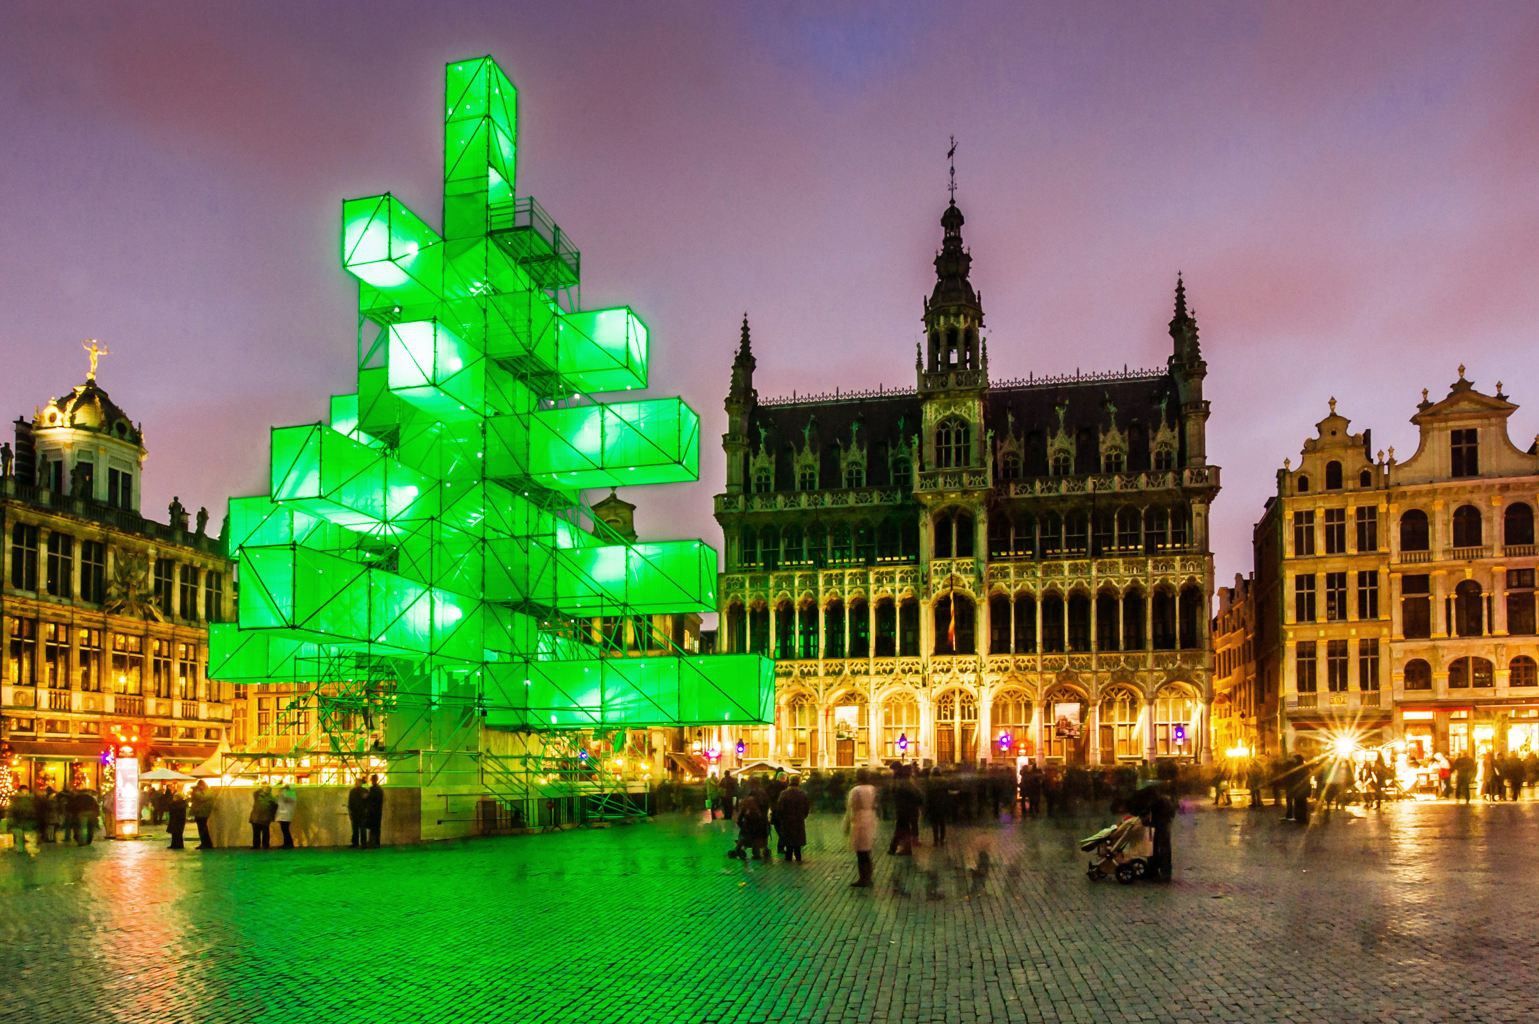 The Brussels Christmas 'Tree', Xmas3 in 2012